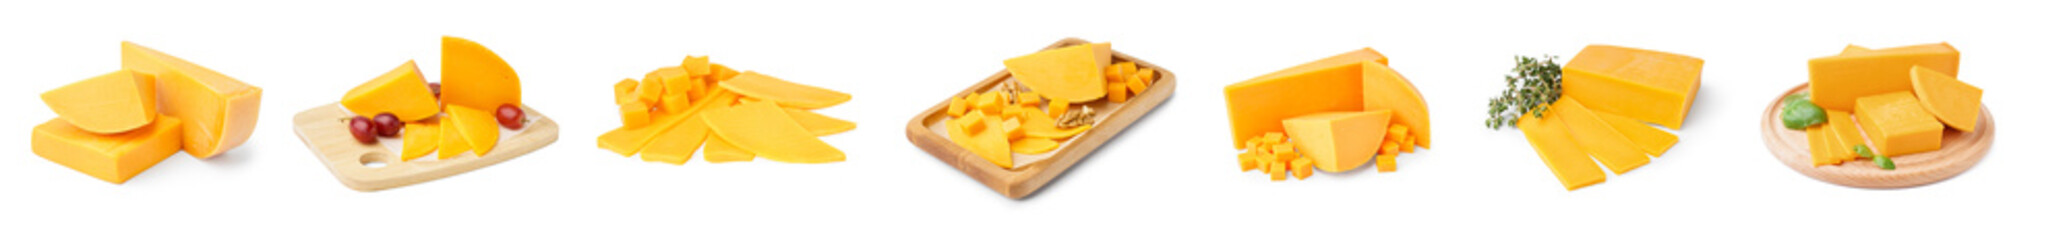 Collage of tasty cheddar cheese on white background